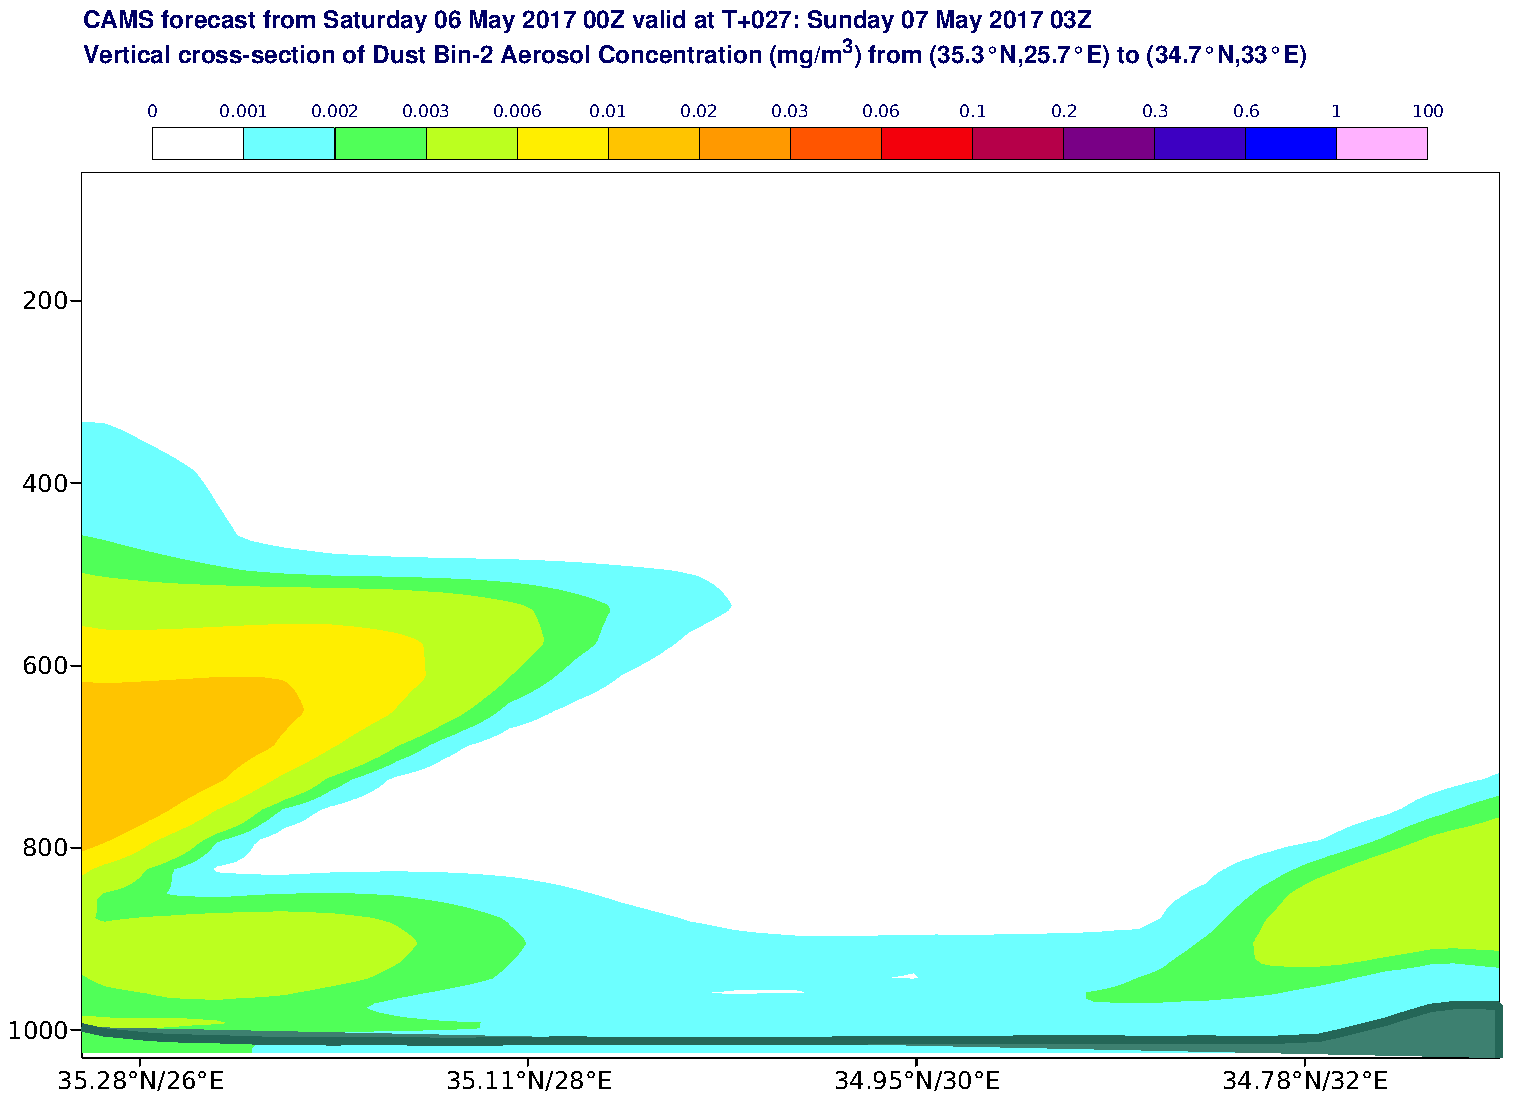 Vertical cross-section of Dust Bin-2 Aerosol Concentration (mg/m3) valid at T27 - 2017-05-07 03:00